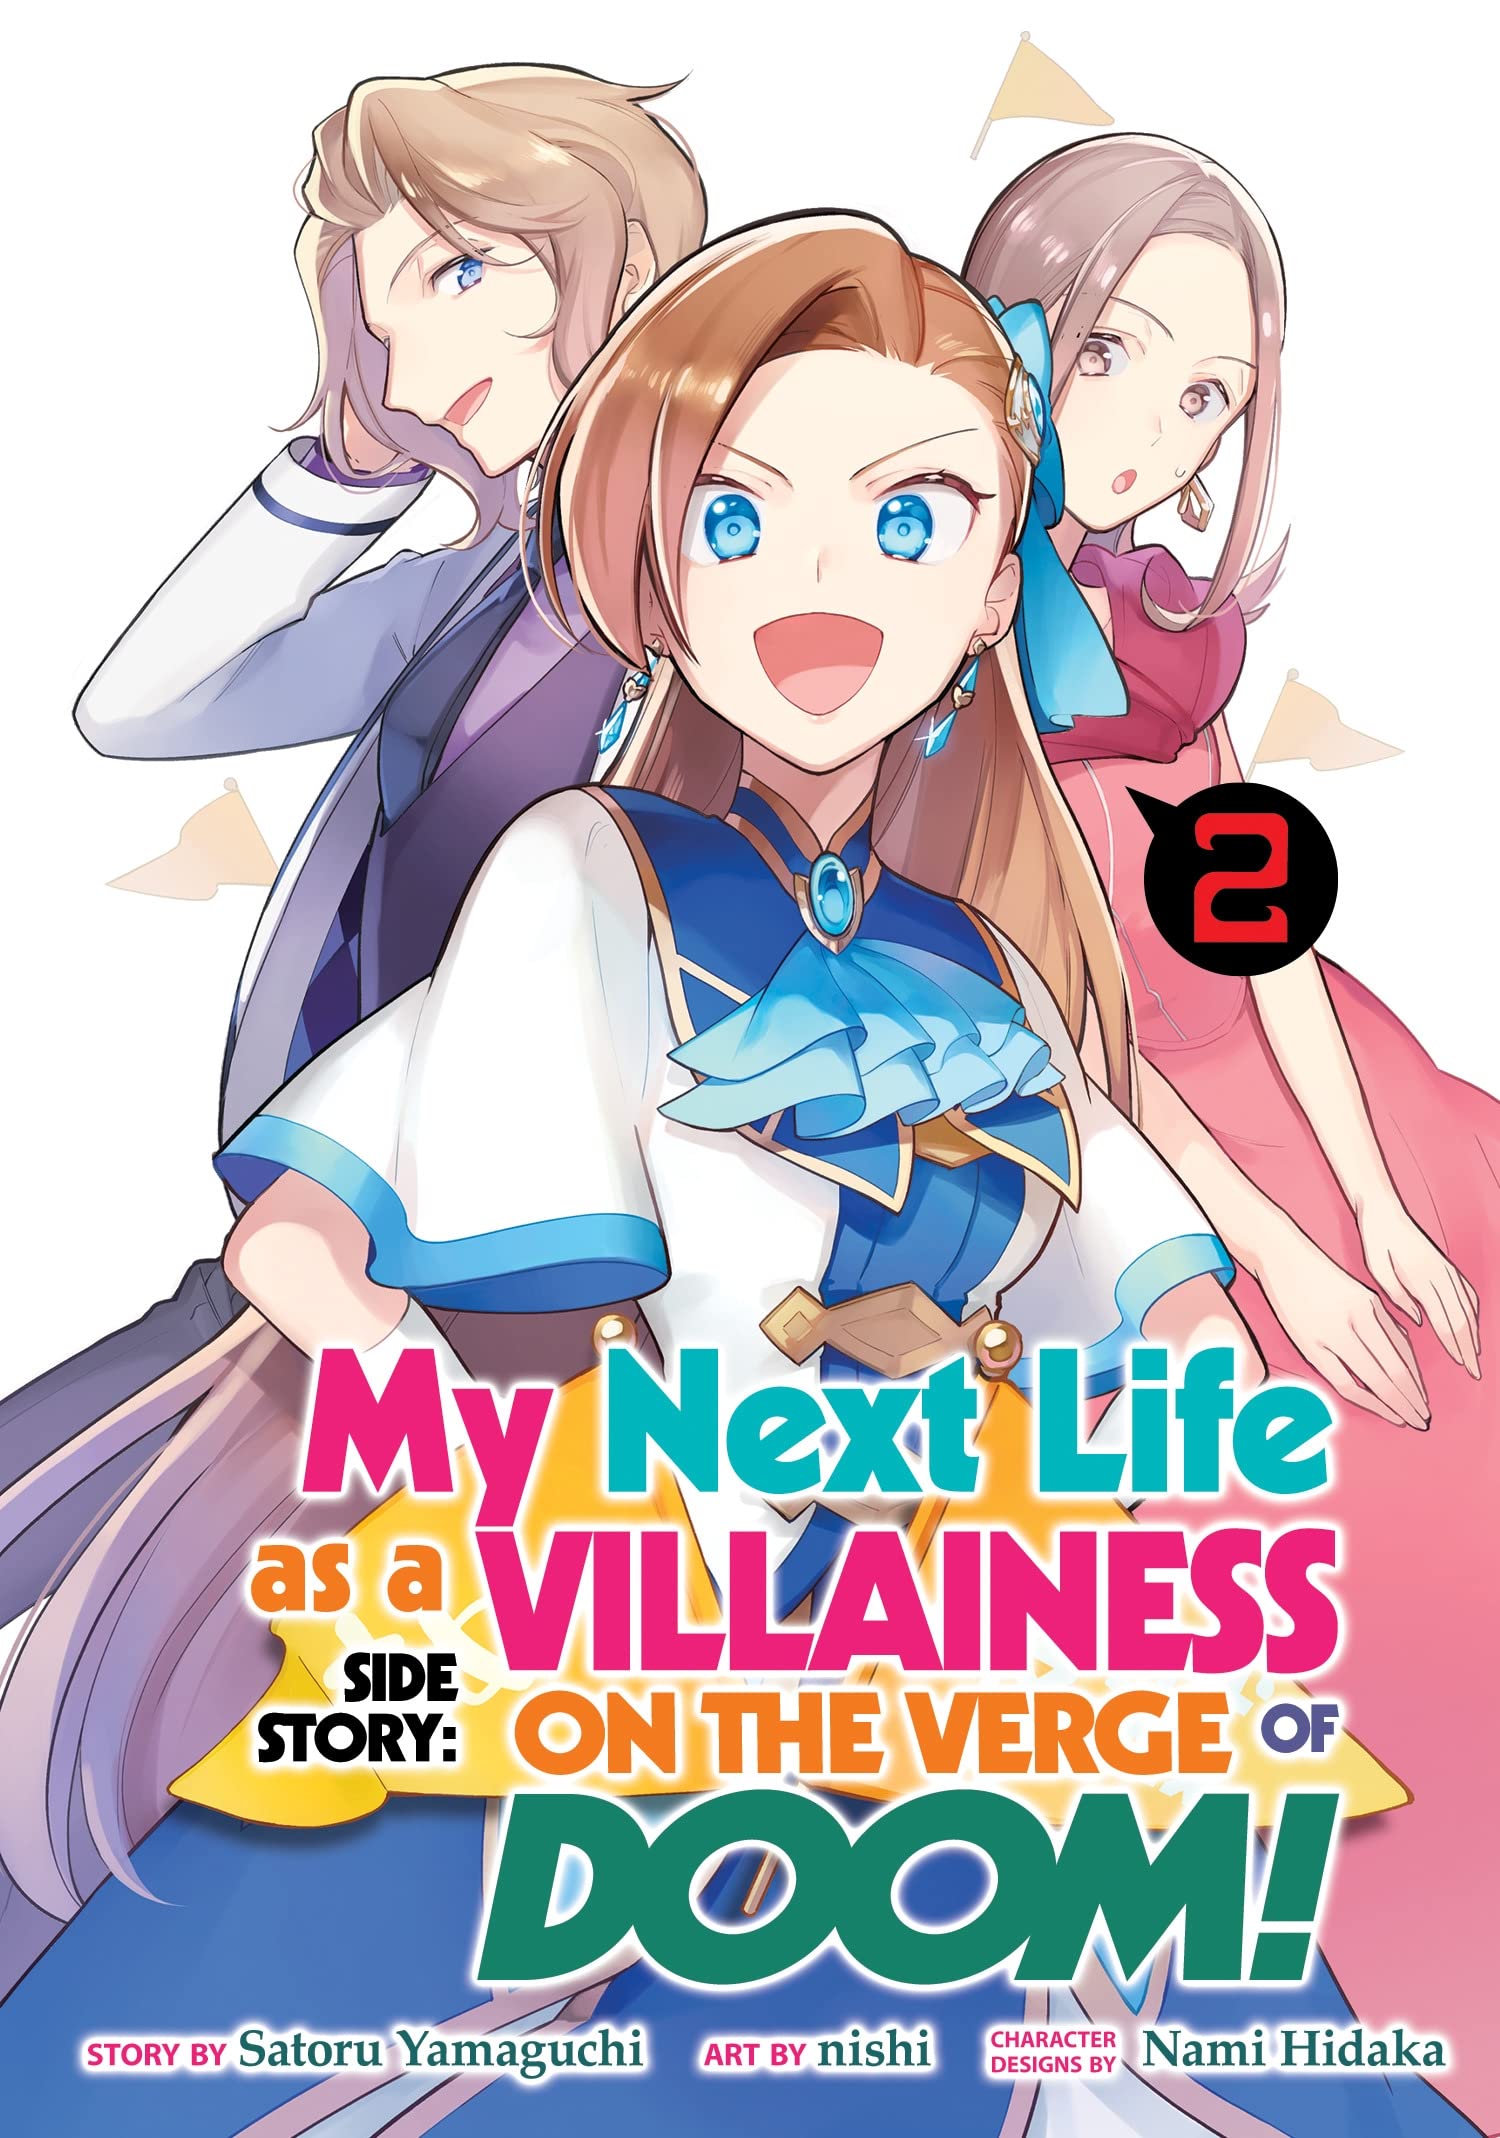 My Next Life as a Villainess Side Story: On the Verge of Doom! - Volume 2